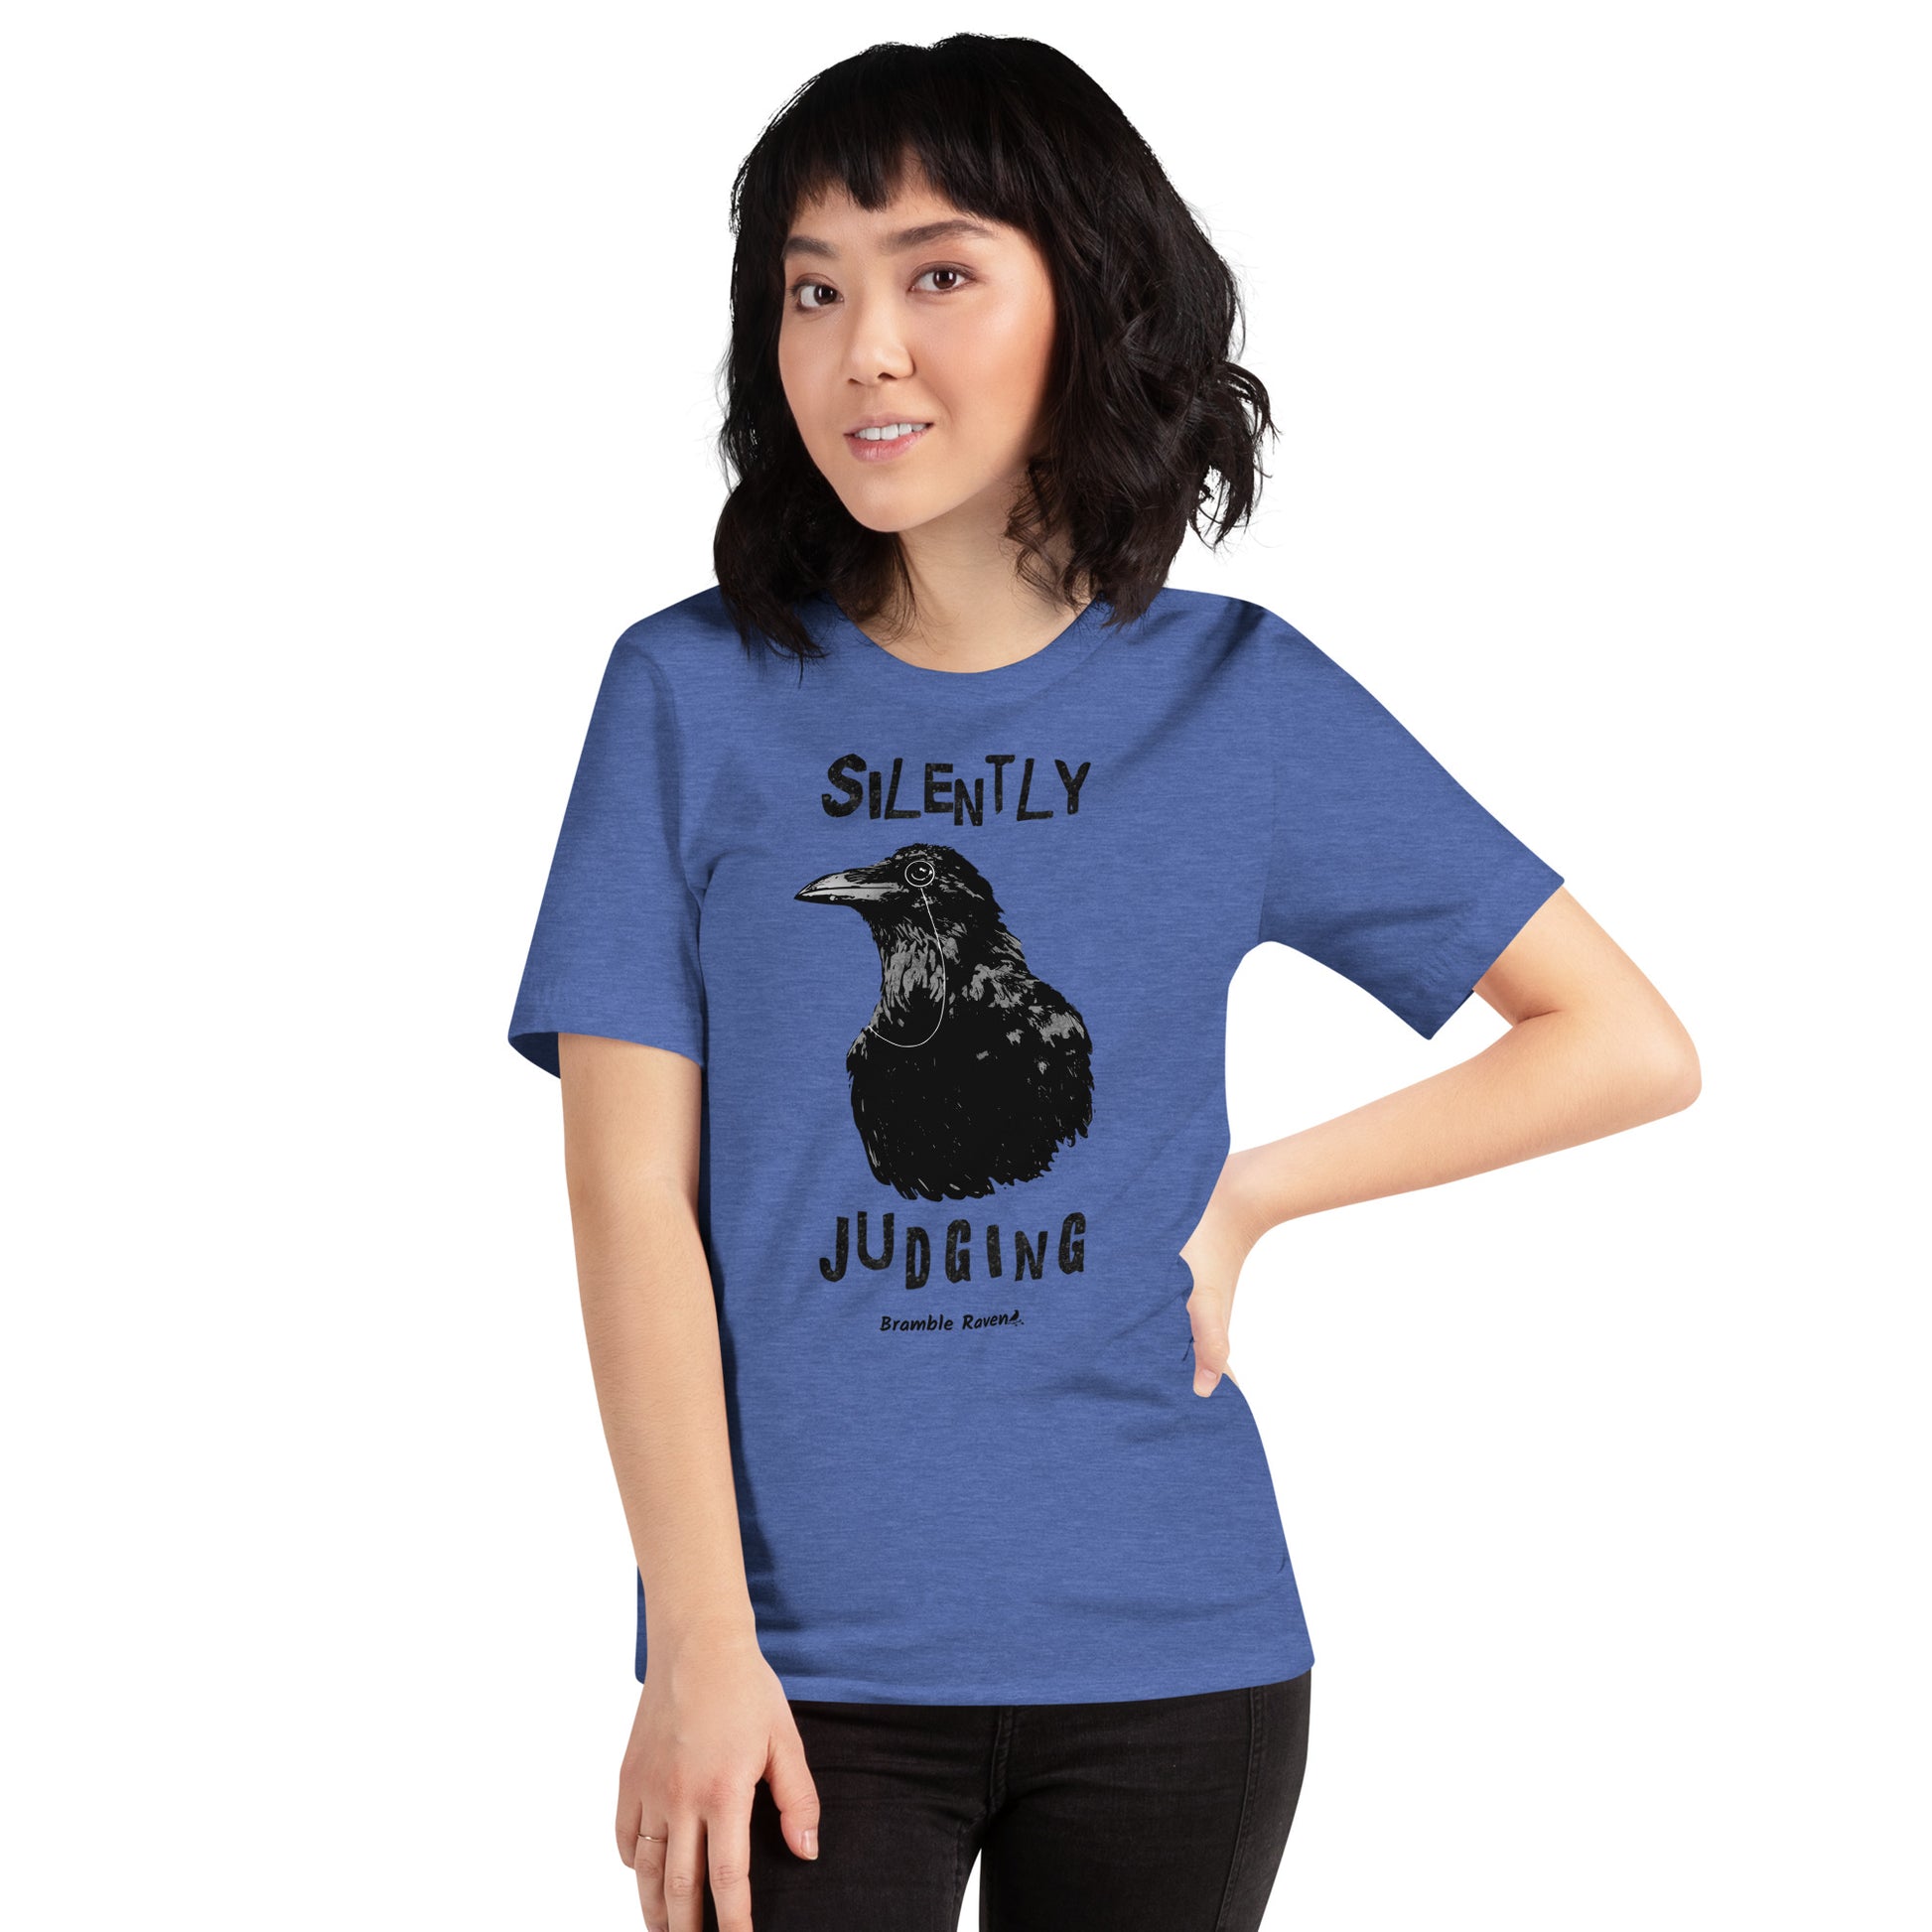 Unisex heather true royal blue colored t-shirt. Features vertical image of silently judging text above and below black crow wearing a monocle.  Shown on female model.